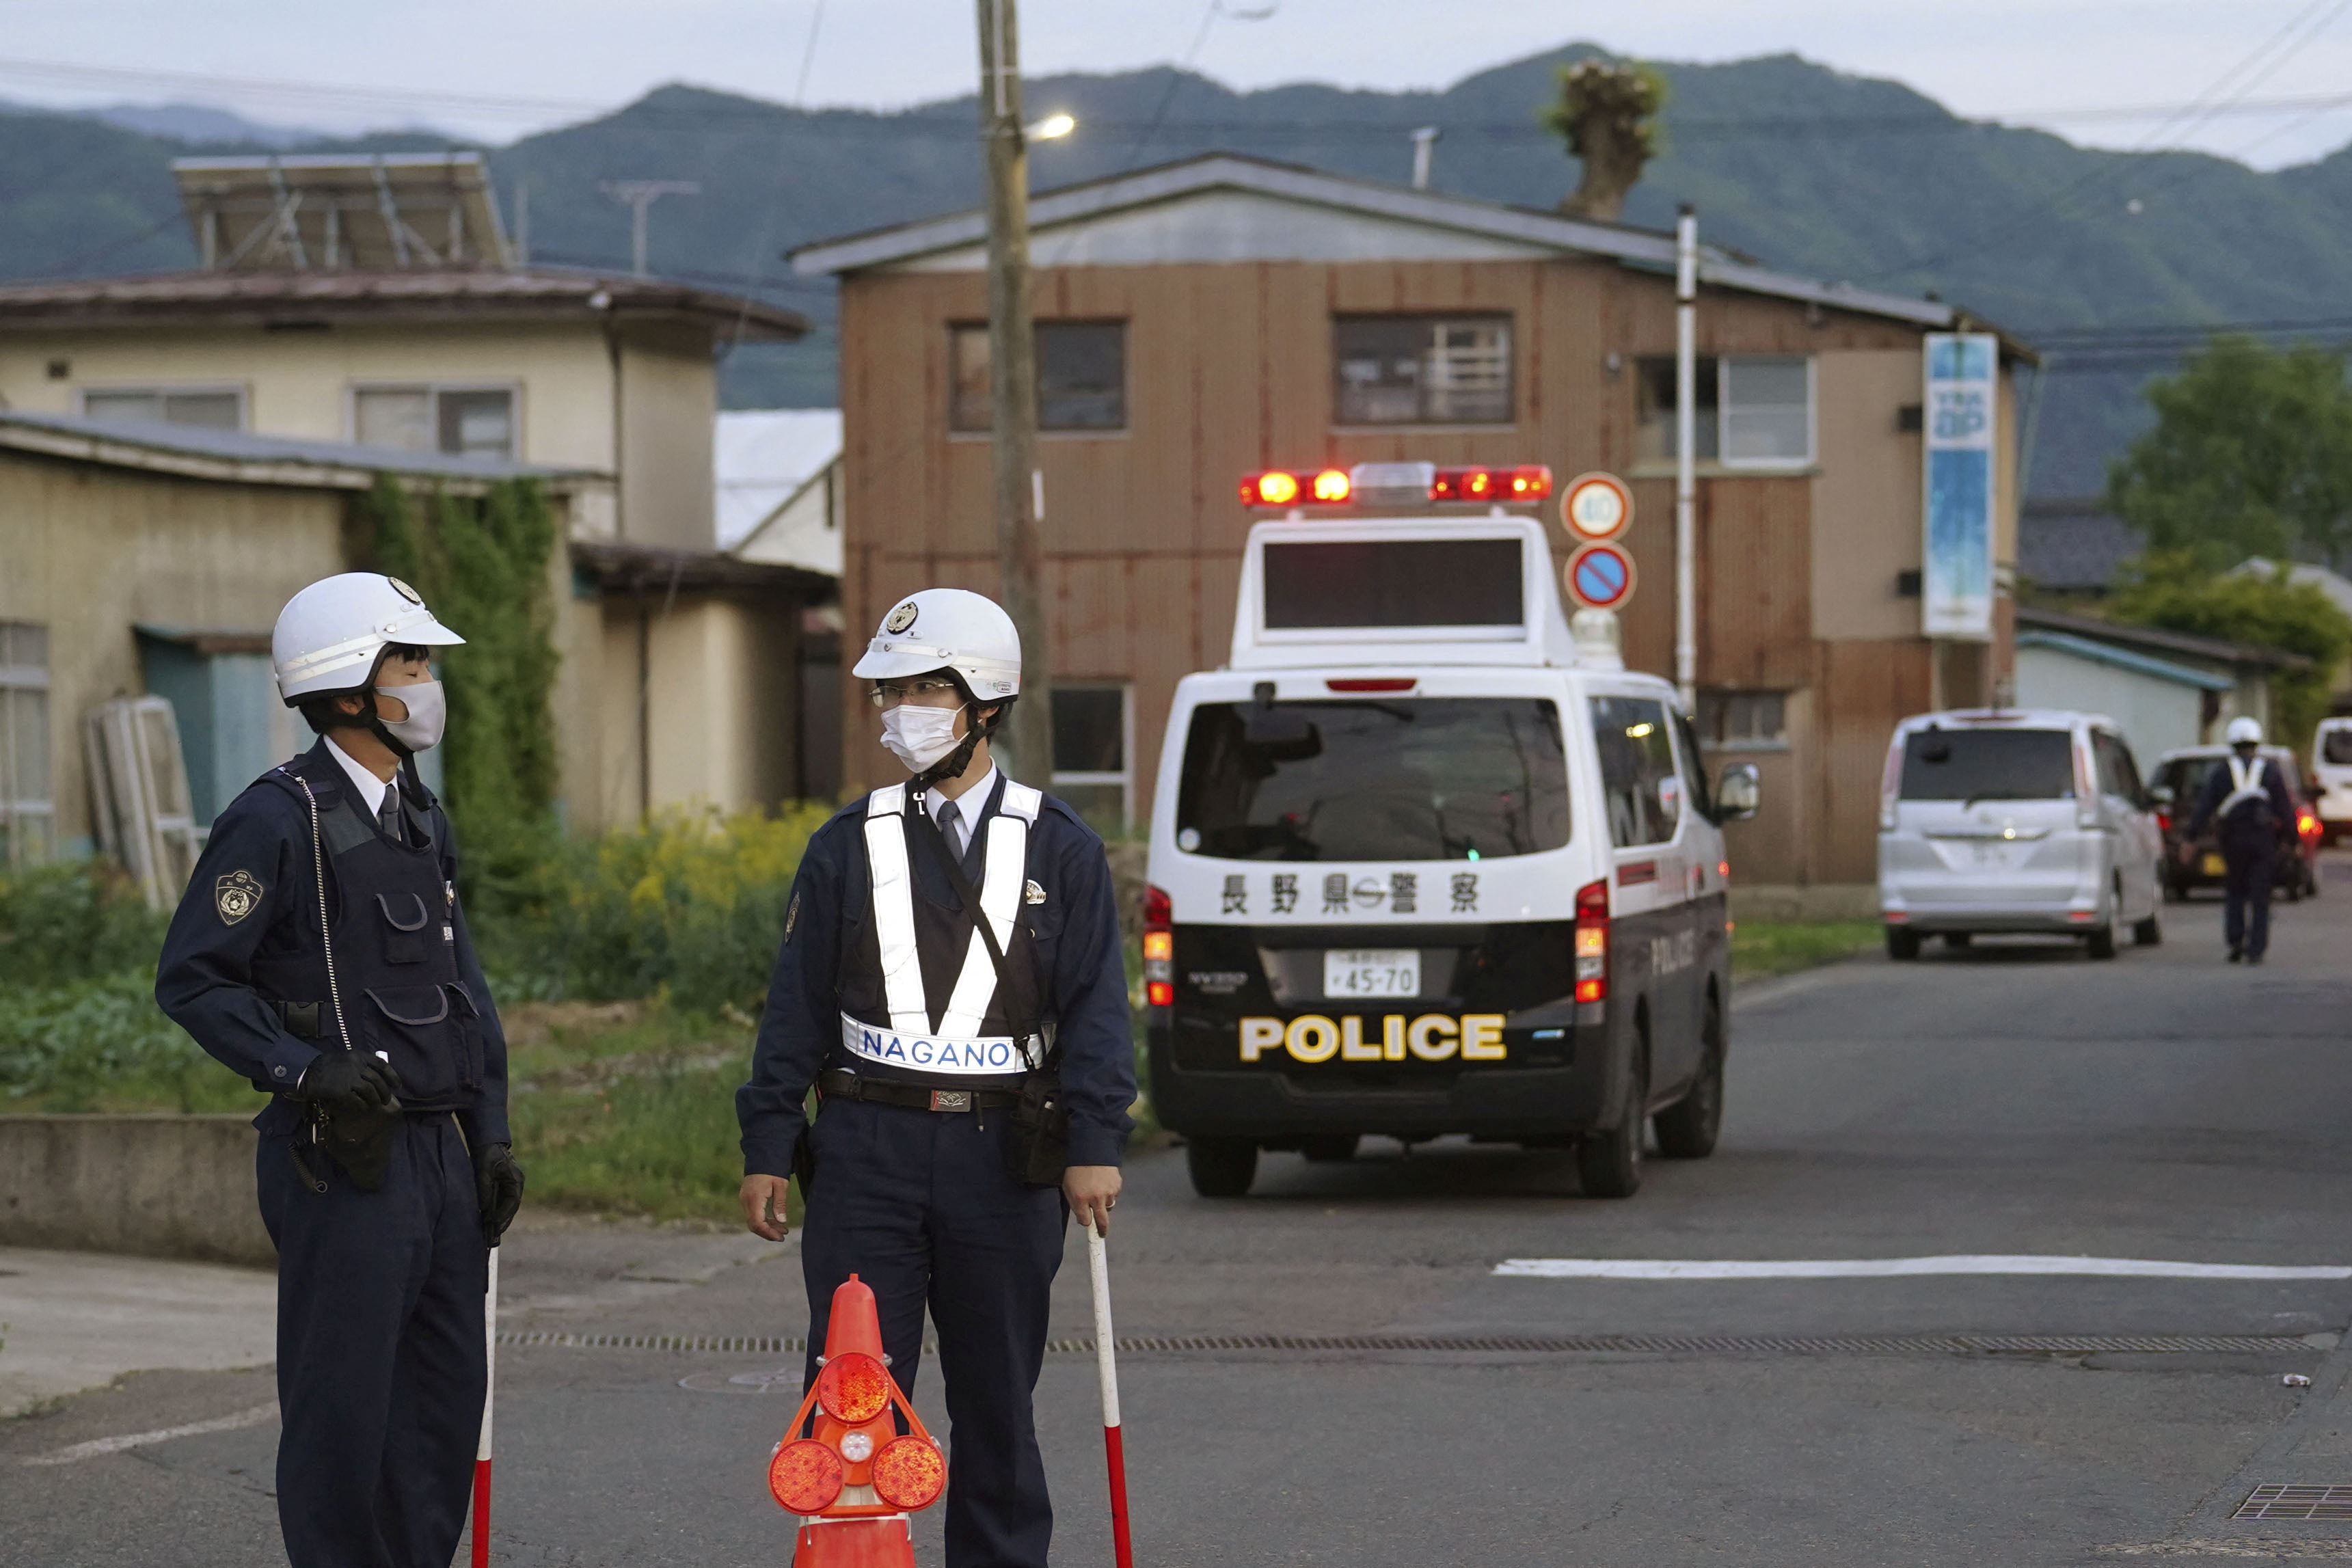 Police officers stand near the scene of a stabbing and shooting incident in Nakano